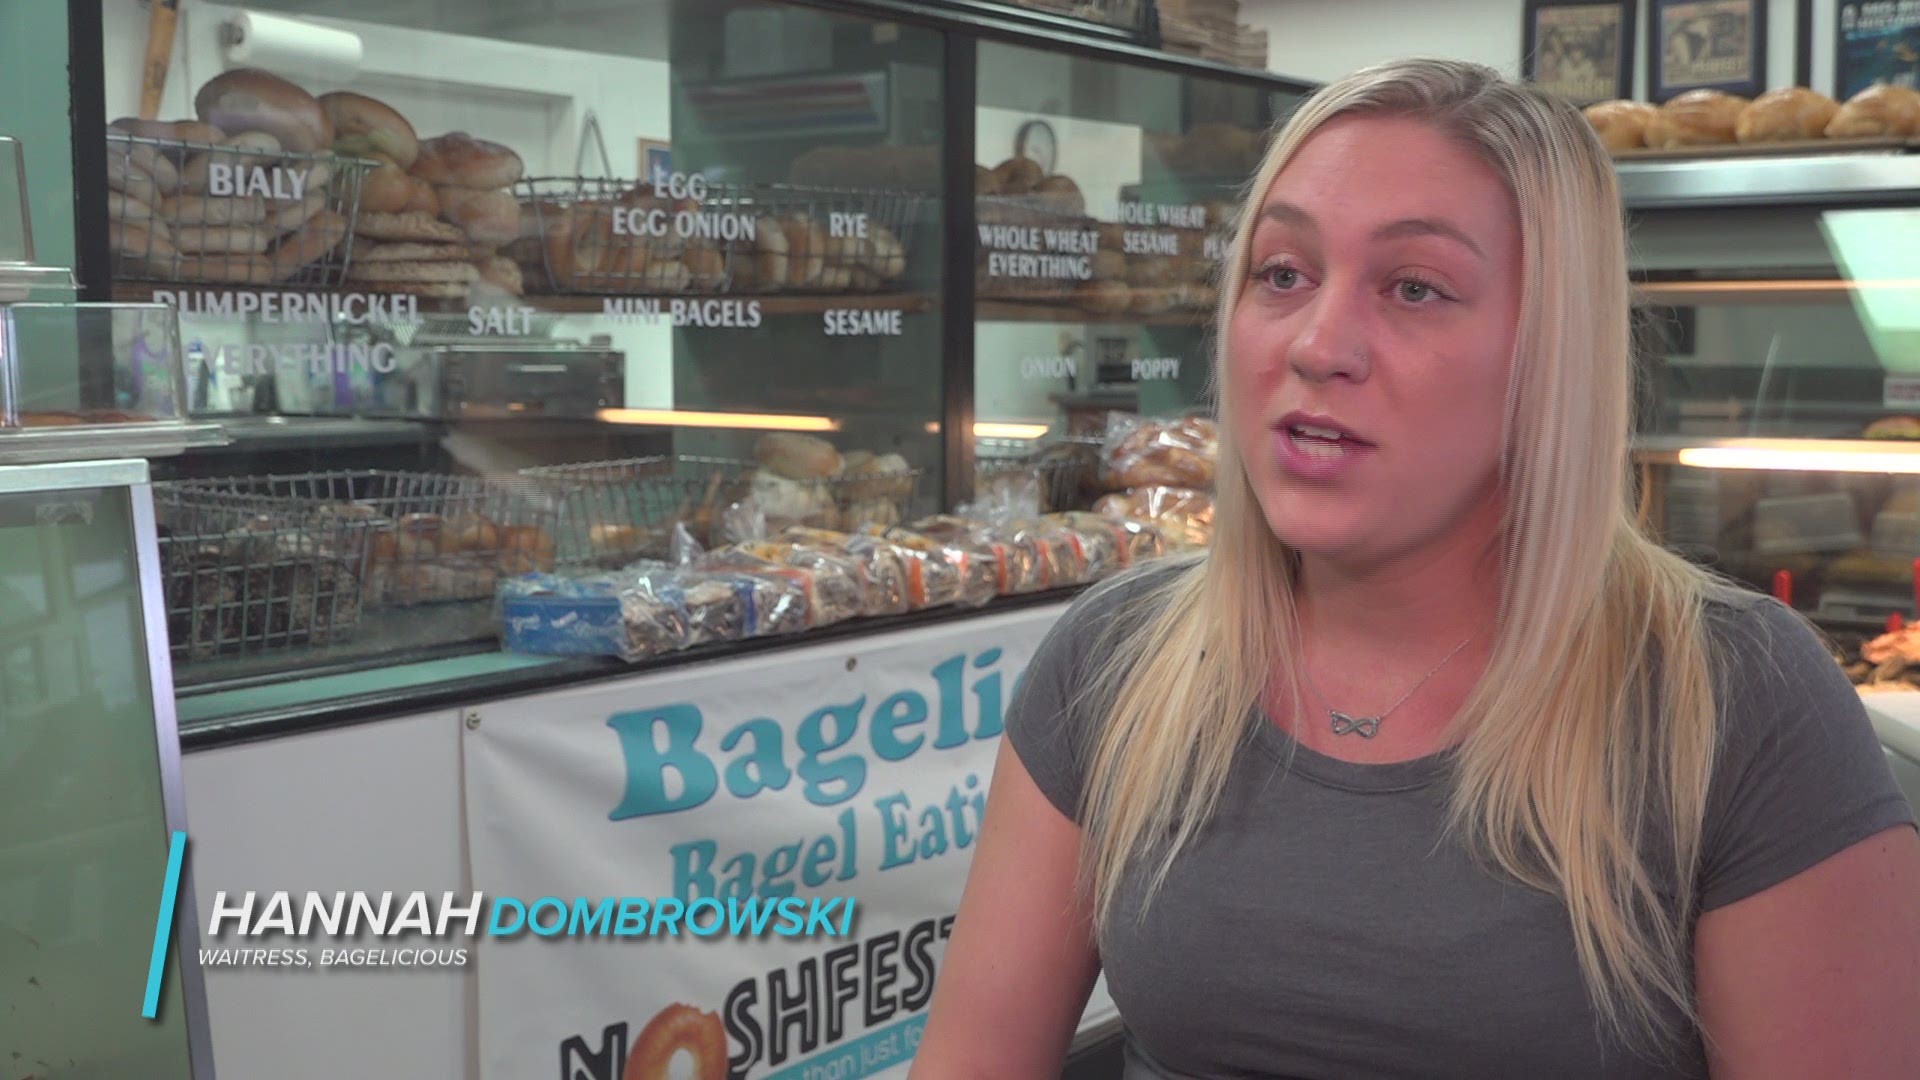 Bagelicious might be known for its large variety of bagels, but this mom and pop operation offers more than just homemade food.